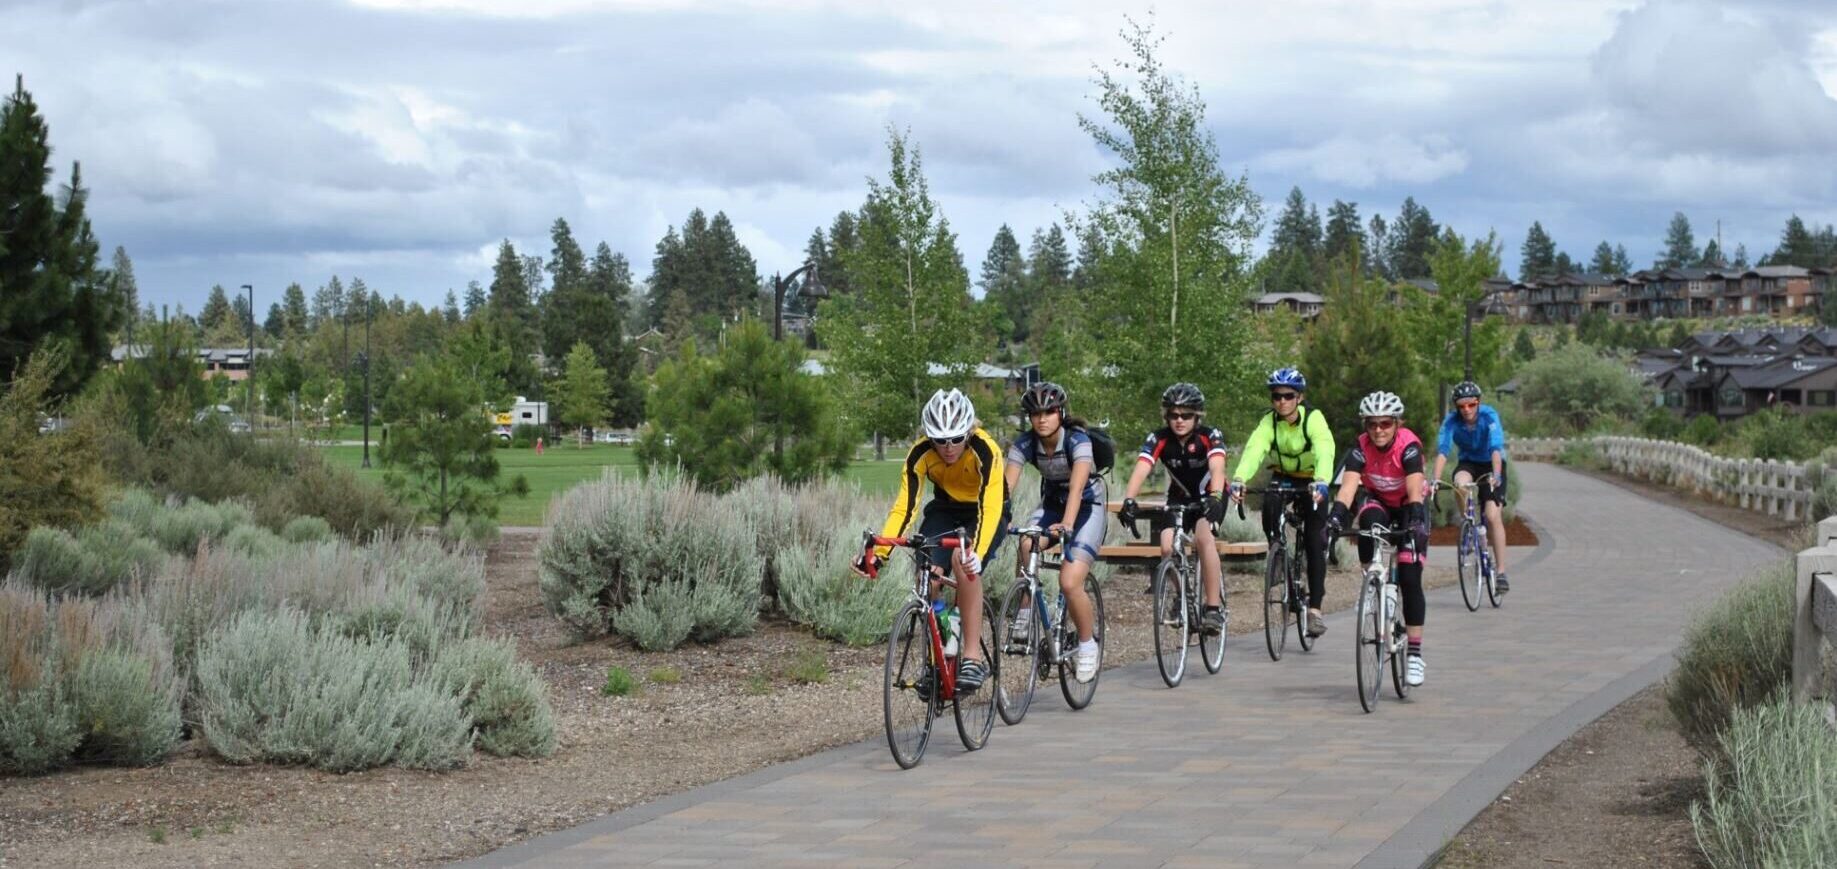 A group cycling in Riverbend Park